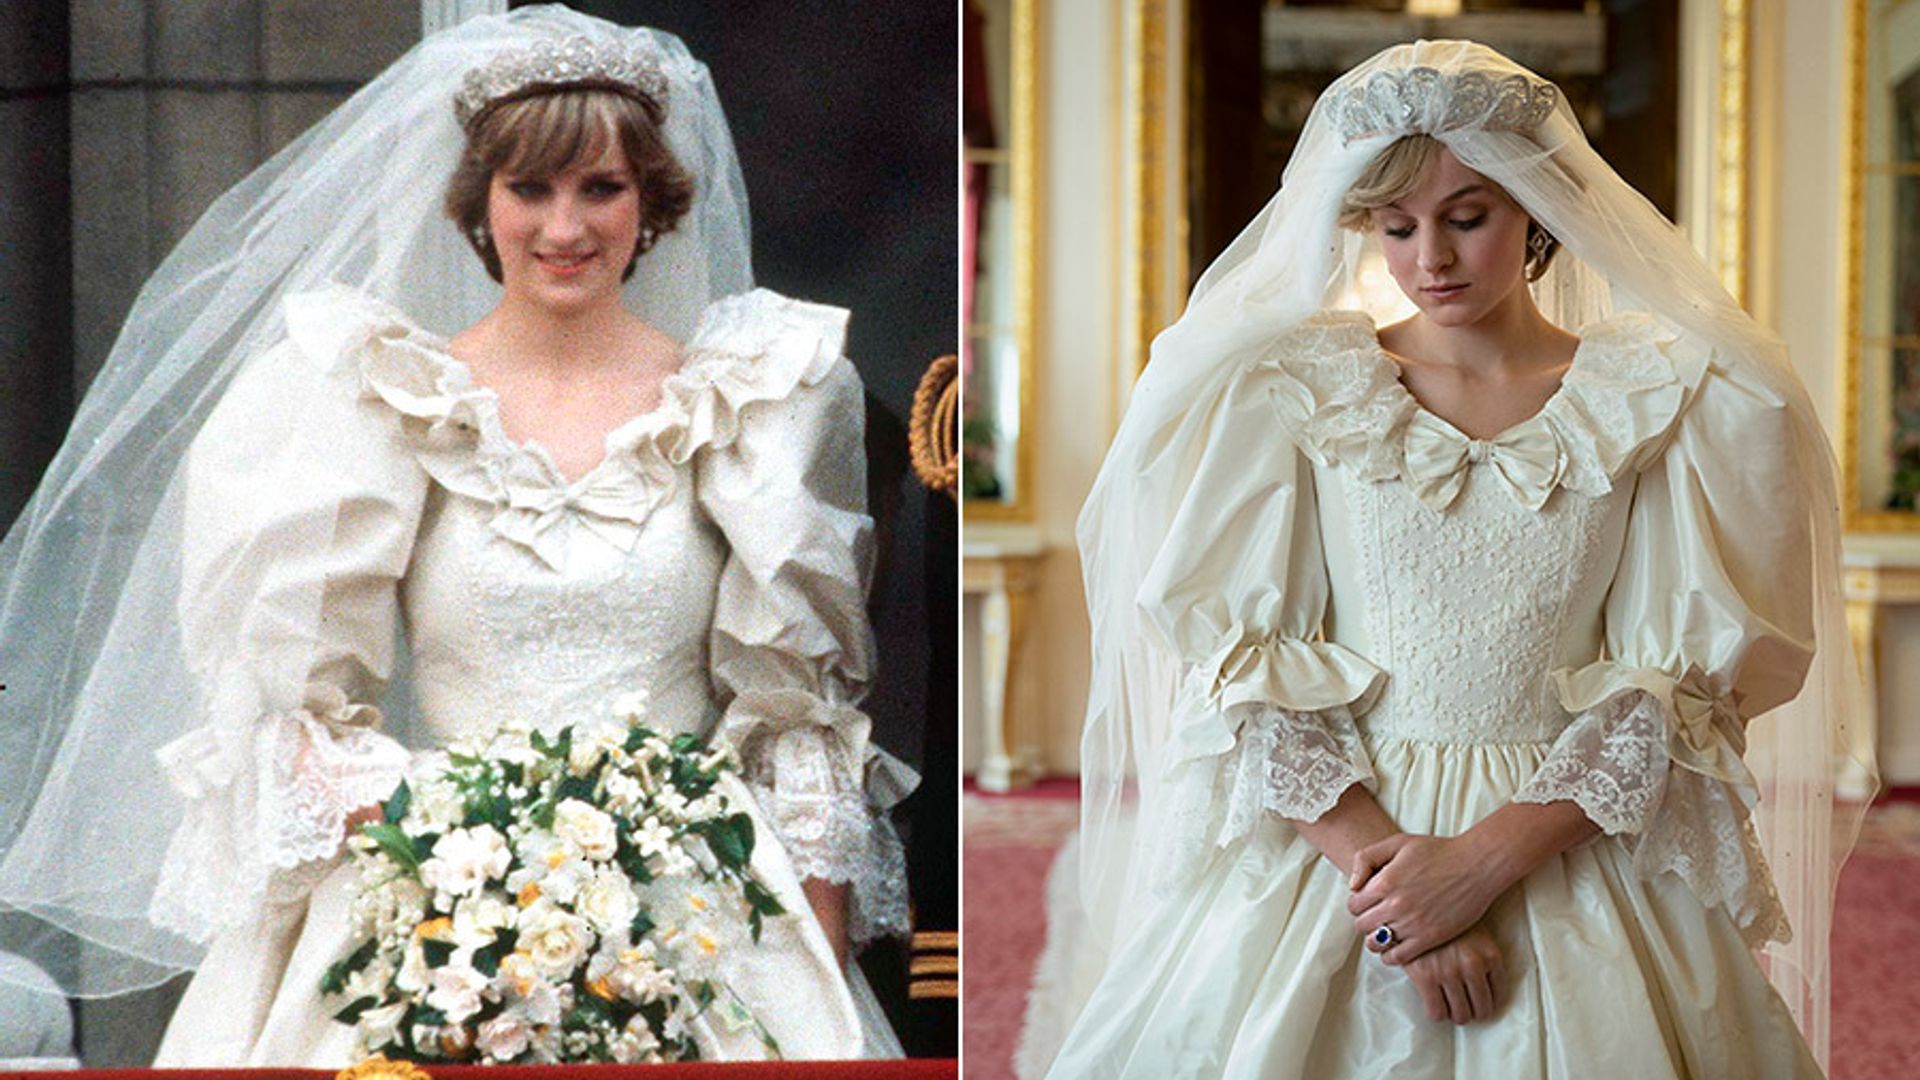 'Very moving to see': Princess Diana's wedding dress designer Elizabeth Emanuel on Emma Corrin's gown on 'The Crown'